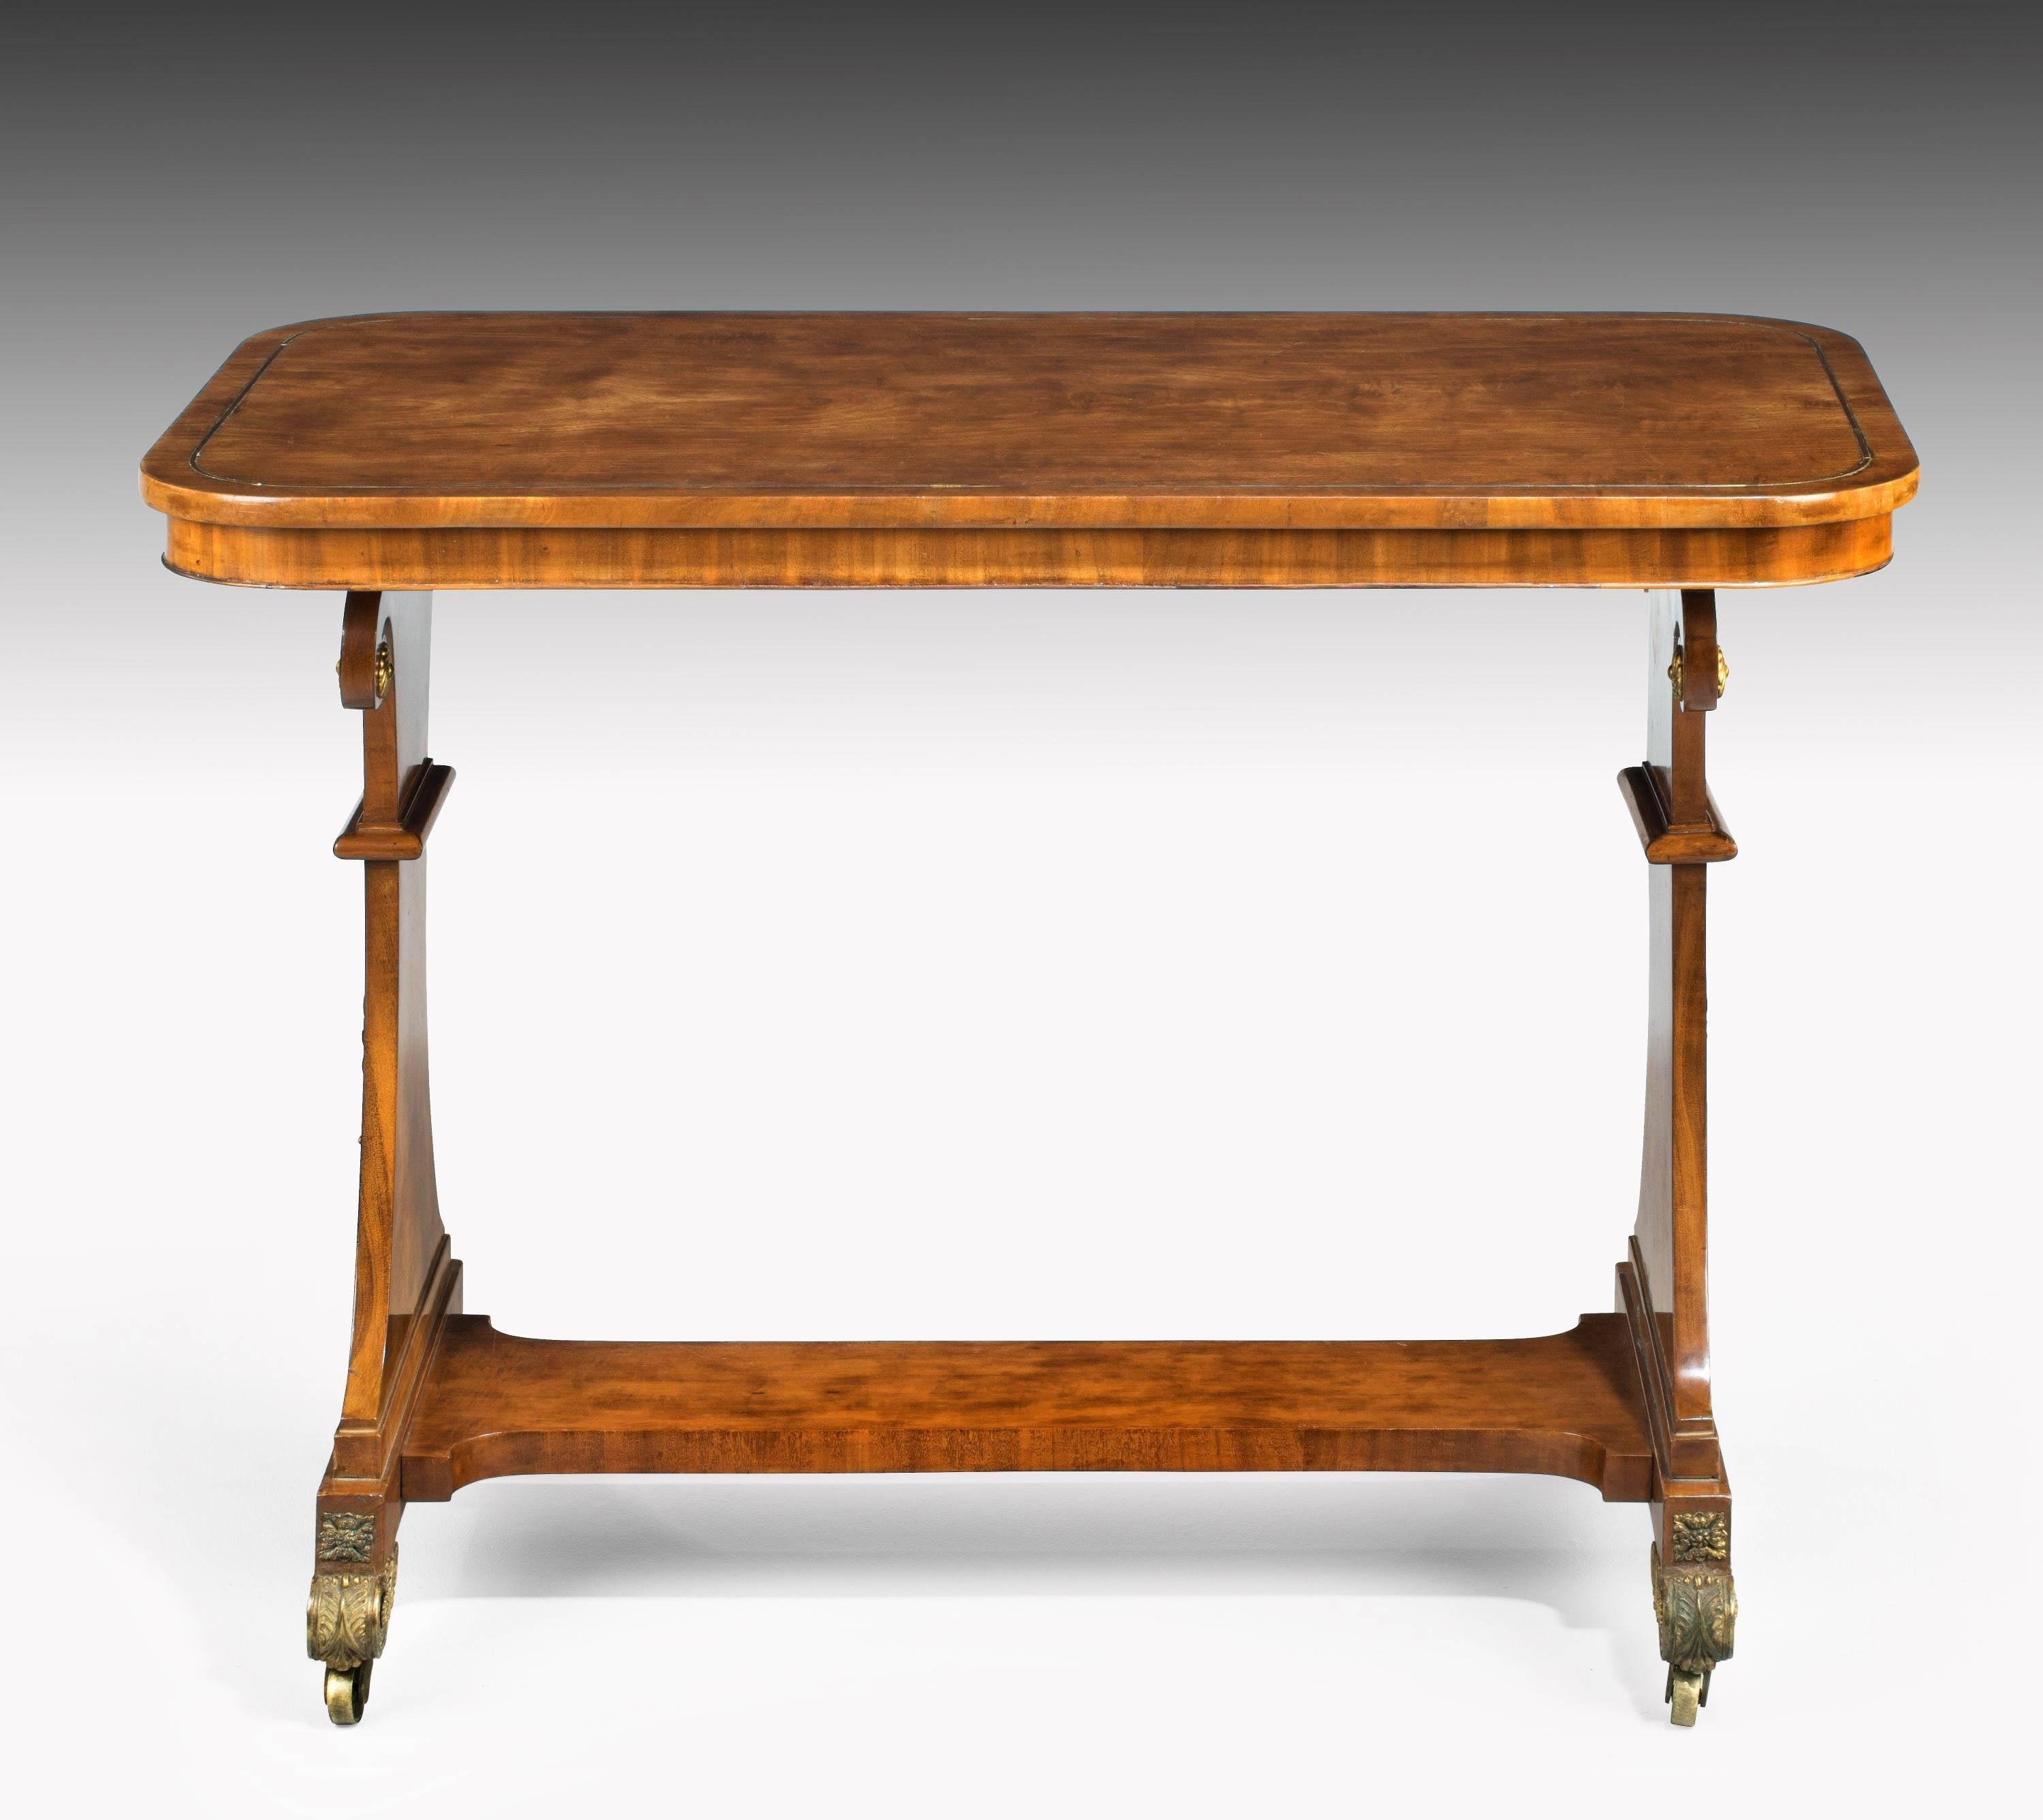 A very elegant and finely figured Regency period satinwood end support table. With the original satinwood foot rest. Beautifully figured ormolu mounts to the ends and finely cast ormolu shoes. A single brass inlay to the top and edging to the base